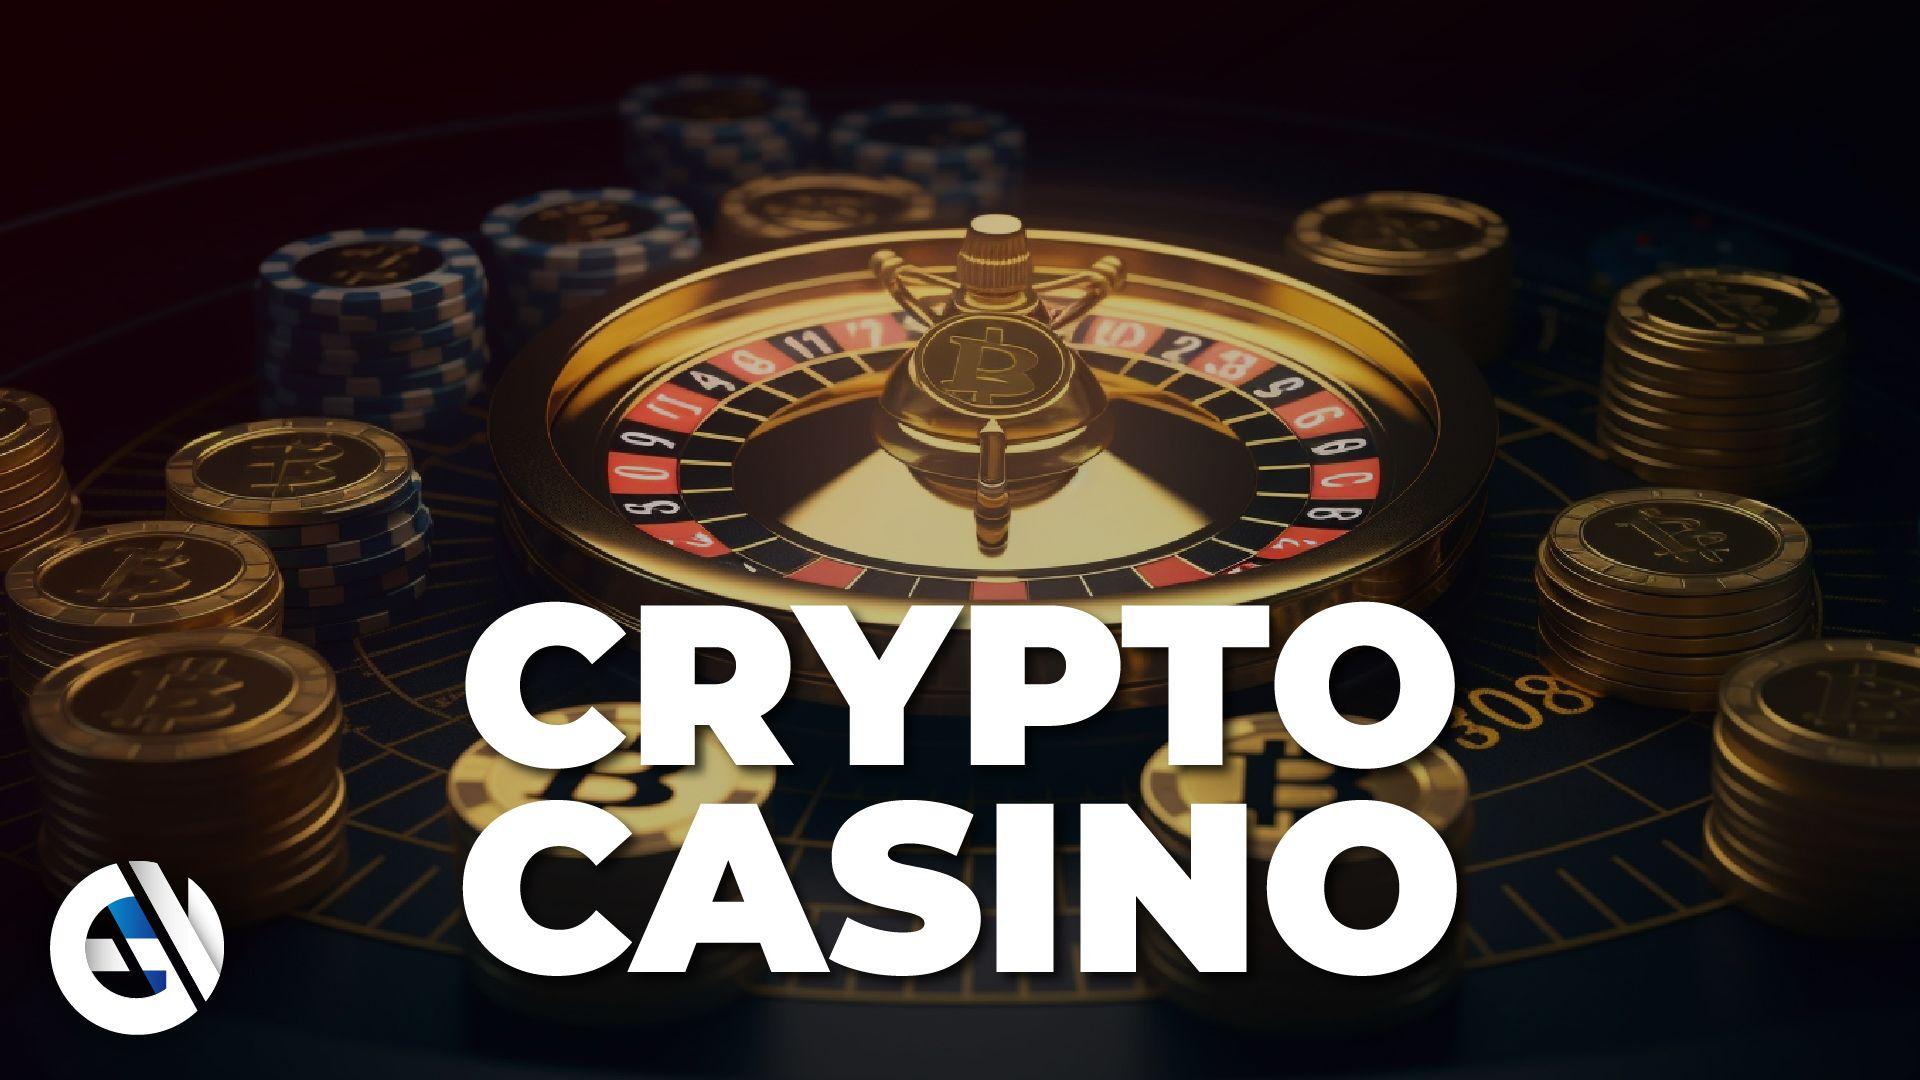 Impact of Cryptocasinos on the Gambling Industry